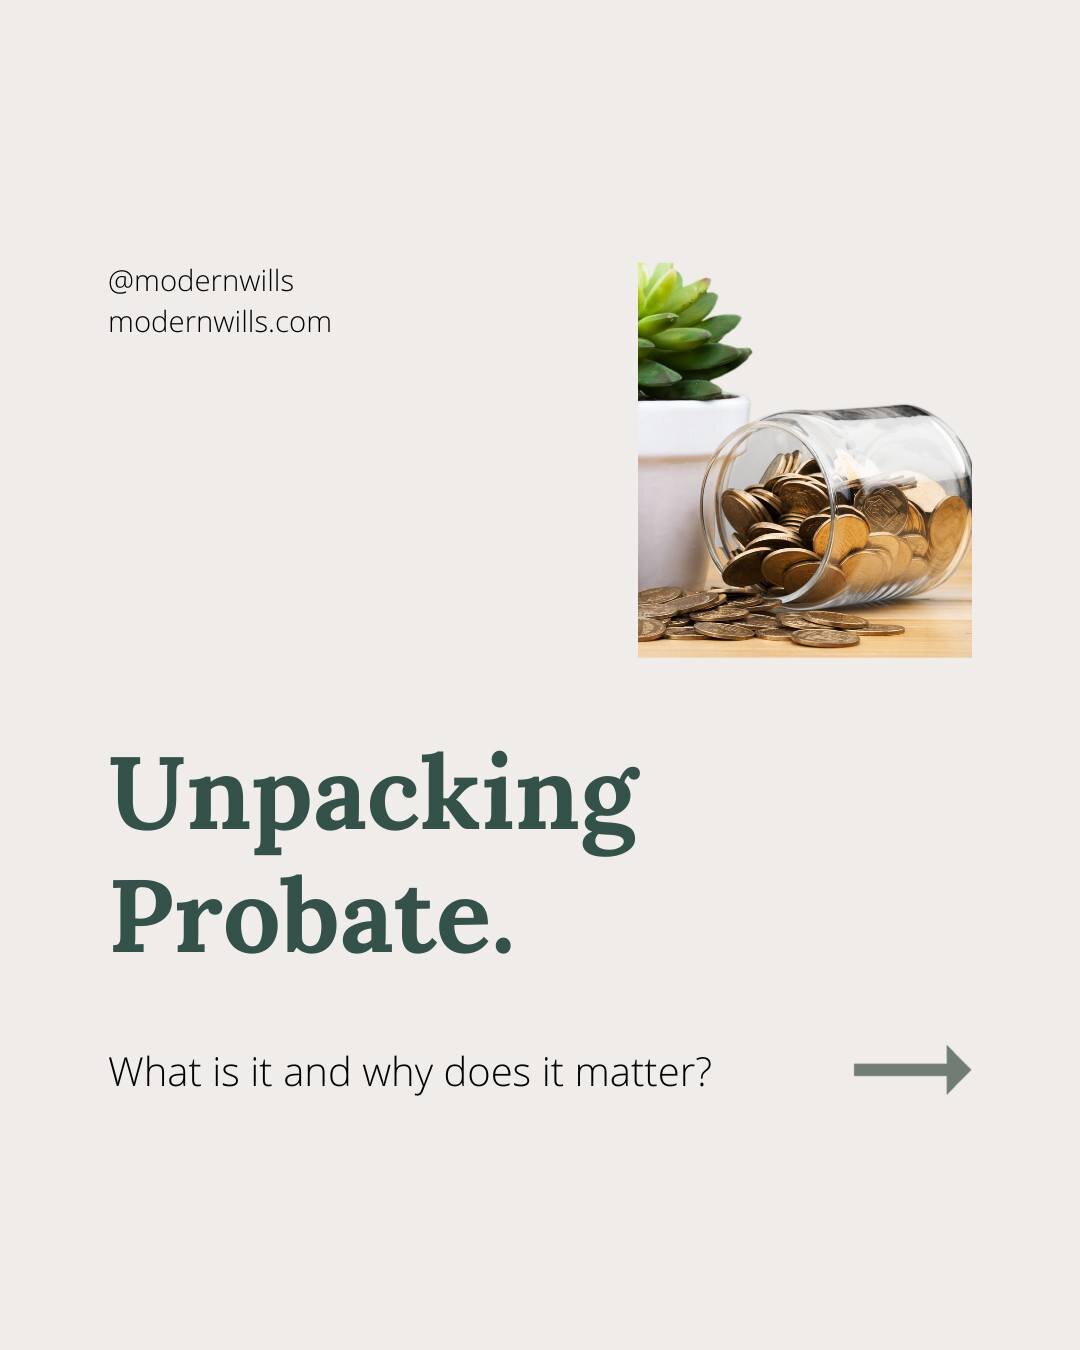 Ever been stumped by legal jargon? 🤔 Swipe through our latest carousel and read our blog to demystify the term 'Probate'. Because understanding your estate matters should be simple.